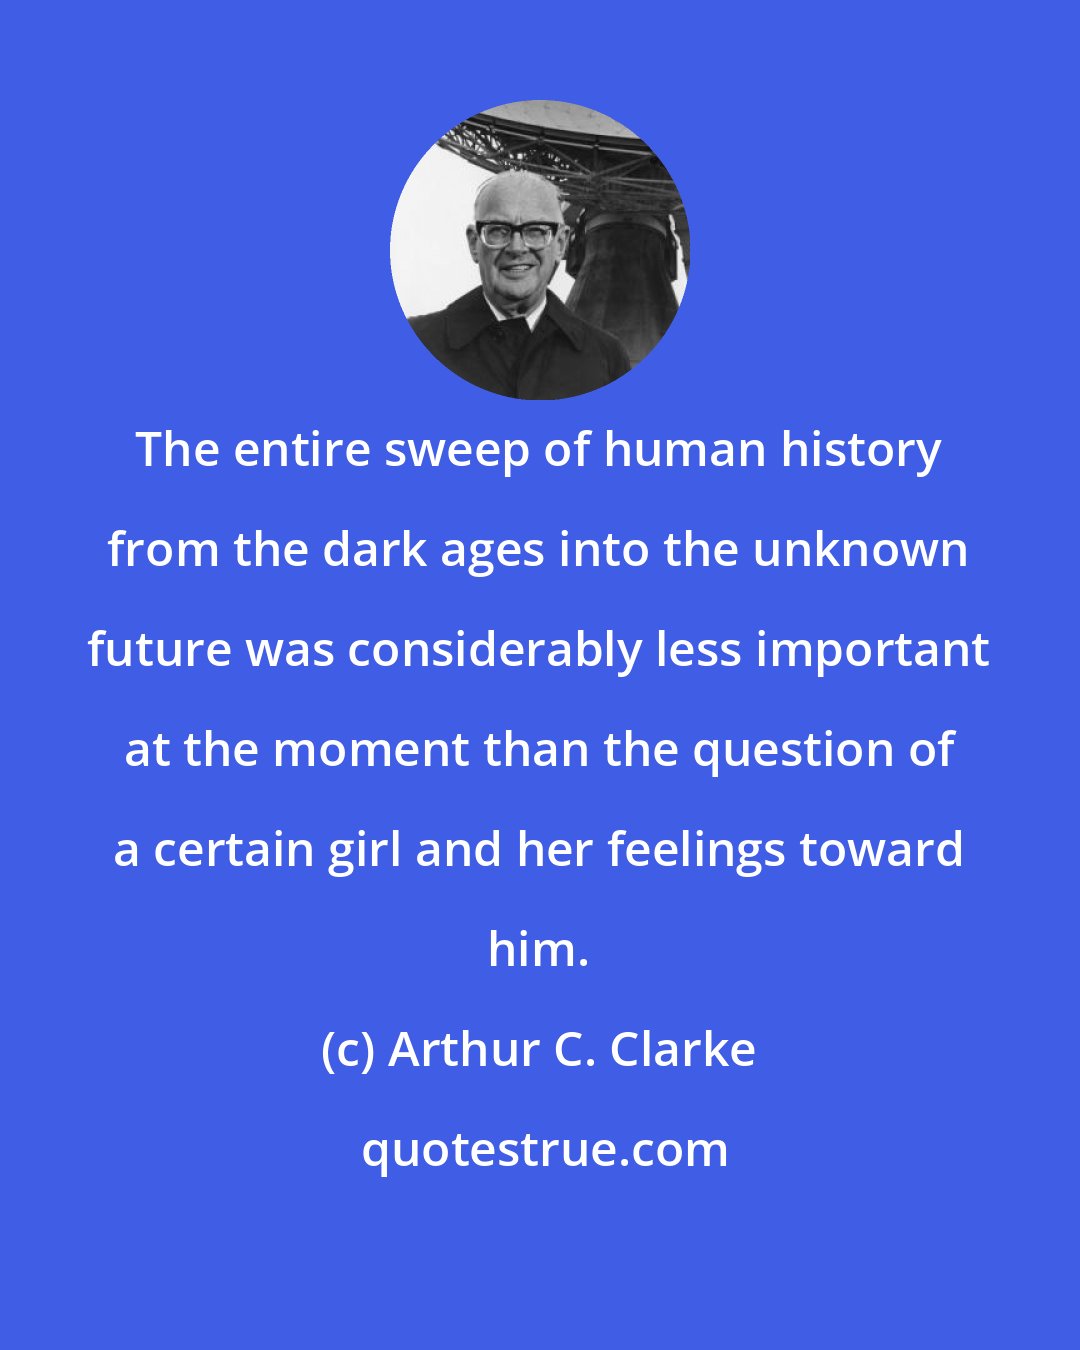 Arthur C. Clarke: The entire sweep of human history from the dark ages into the unknown future was considerably less important at the moment than the question of a certain girl and her feelings toward him.